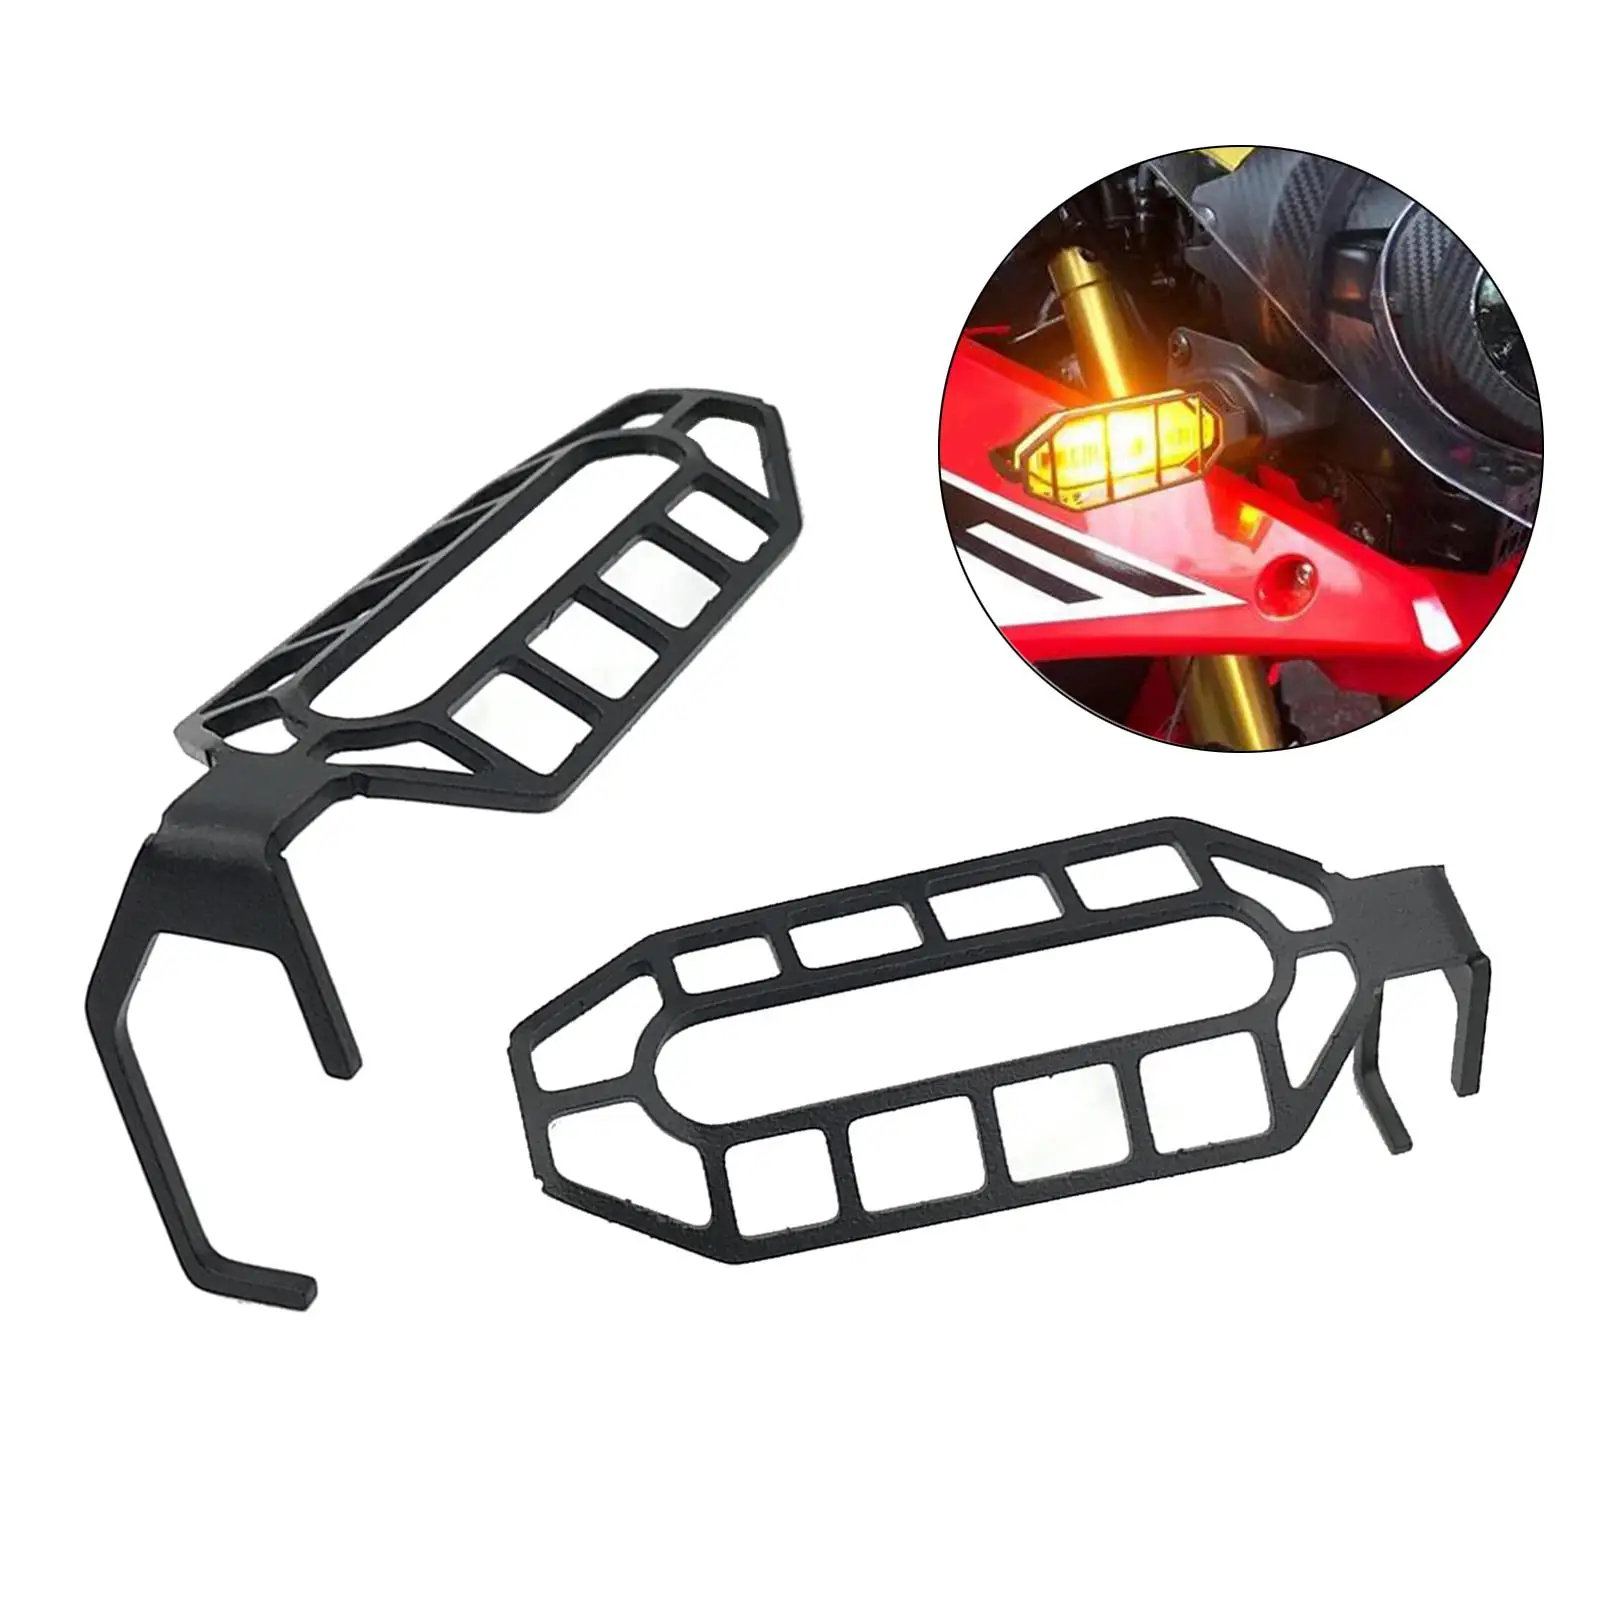 2x Stainless Steel Motorcycle Turn Signal Light Shield Guard Cover For Honda CB500X CB 500X 2019 2020